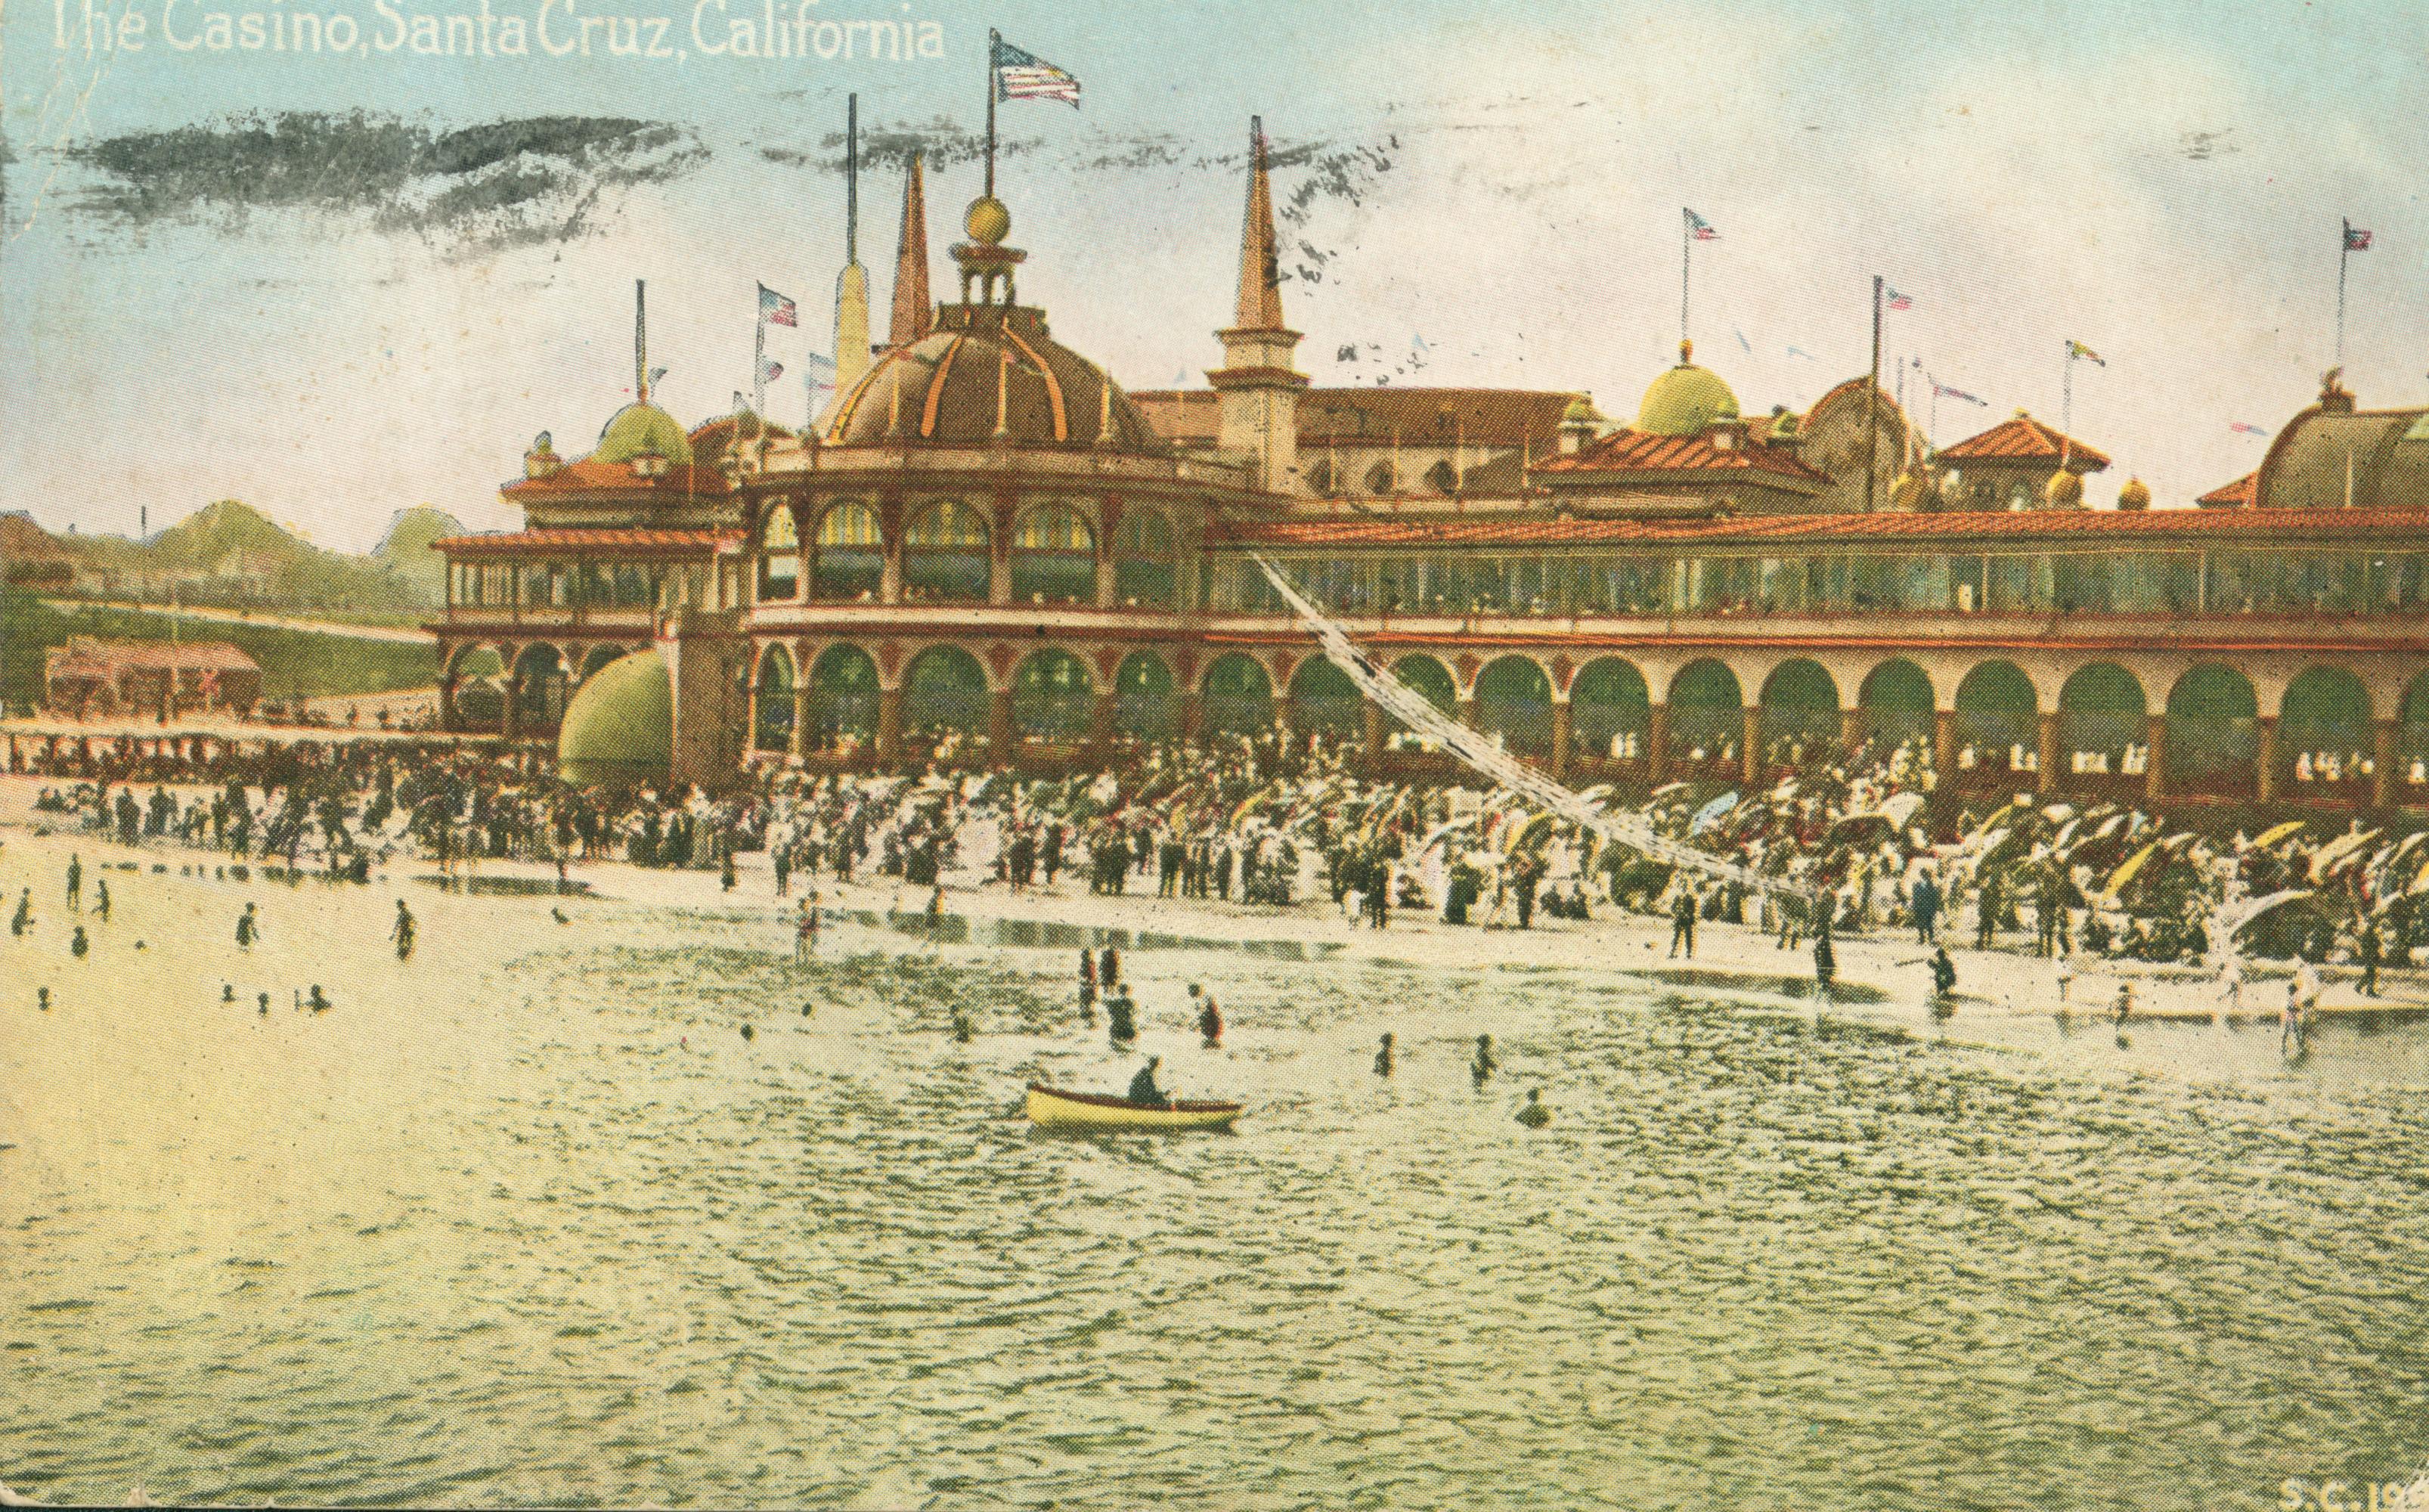 View of people sitting on the beach and swimming in ocean, in front of the casino, exterior view of buildings in background,